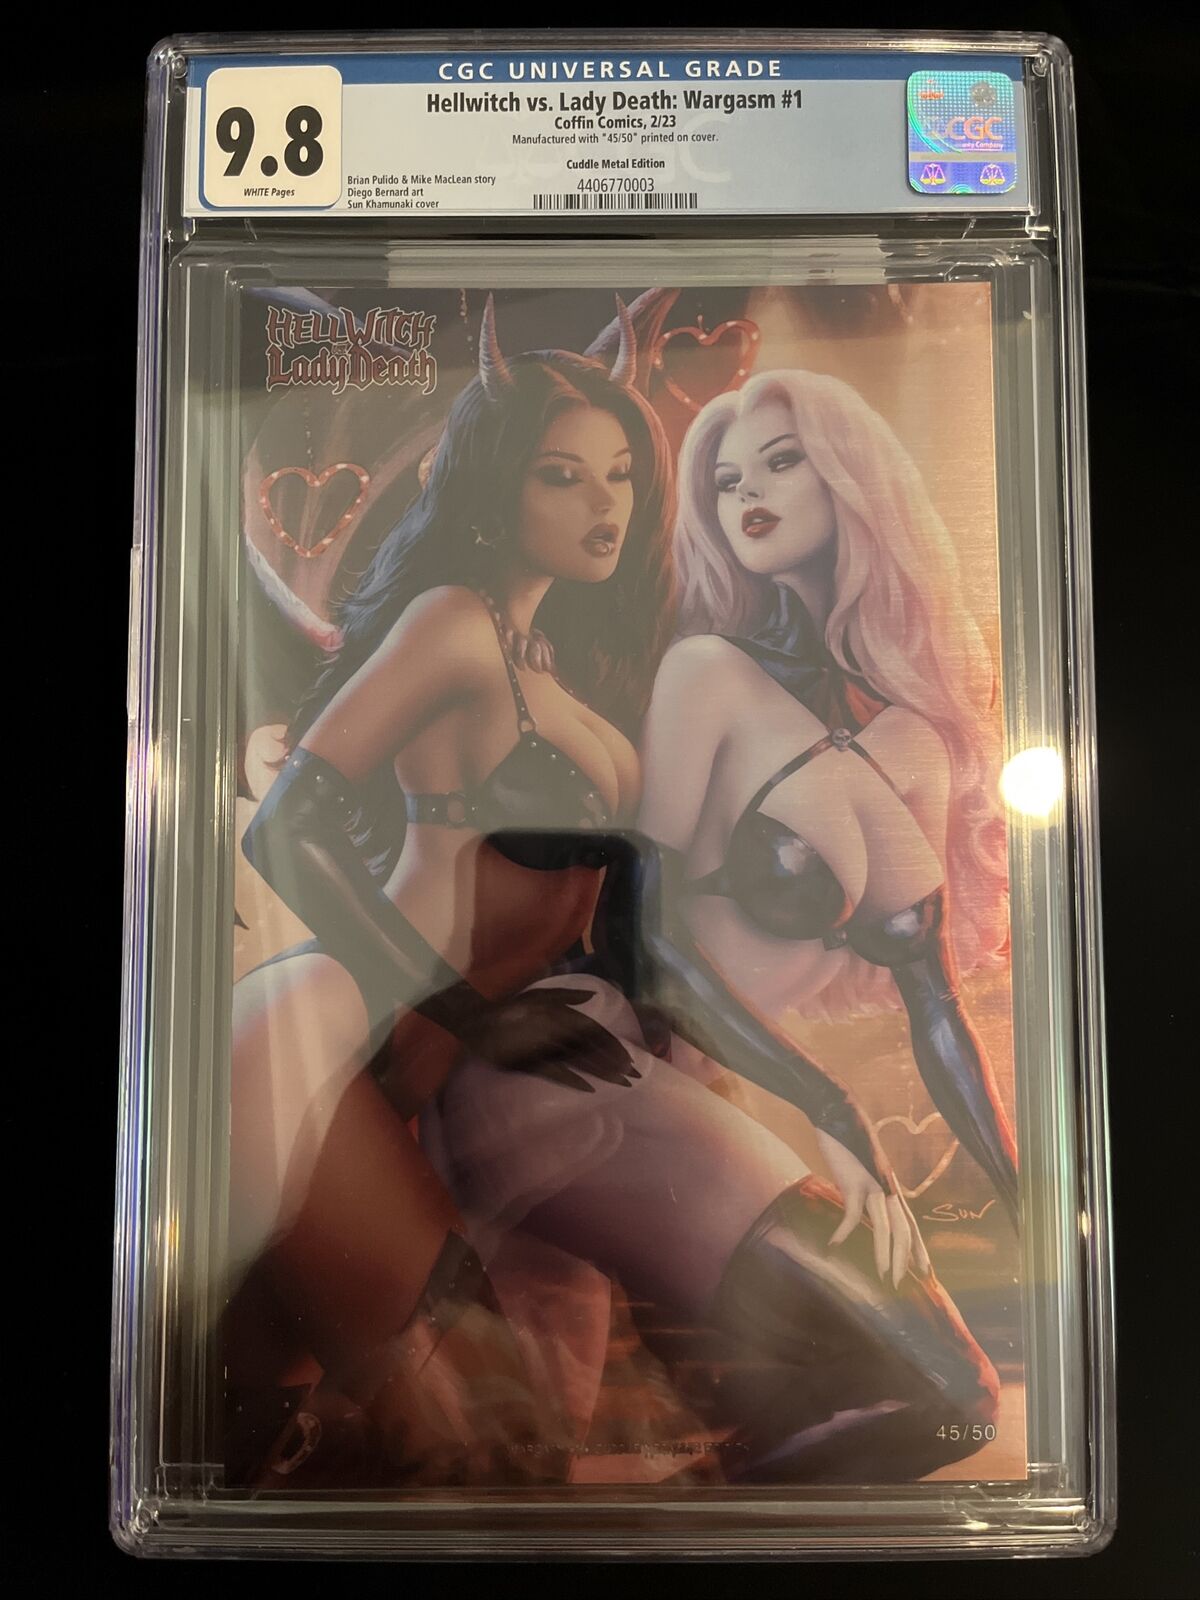 Hellwitch Vs Lady Death #1 - Cuddle METAL Edition Limited To 50 (45/50) CGC 9.8